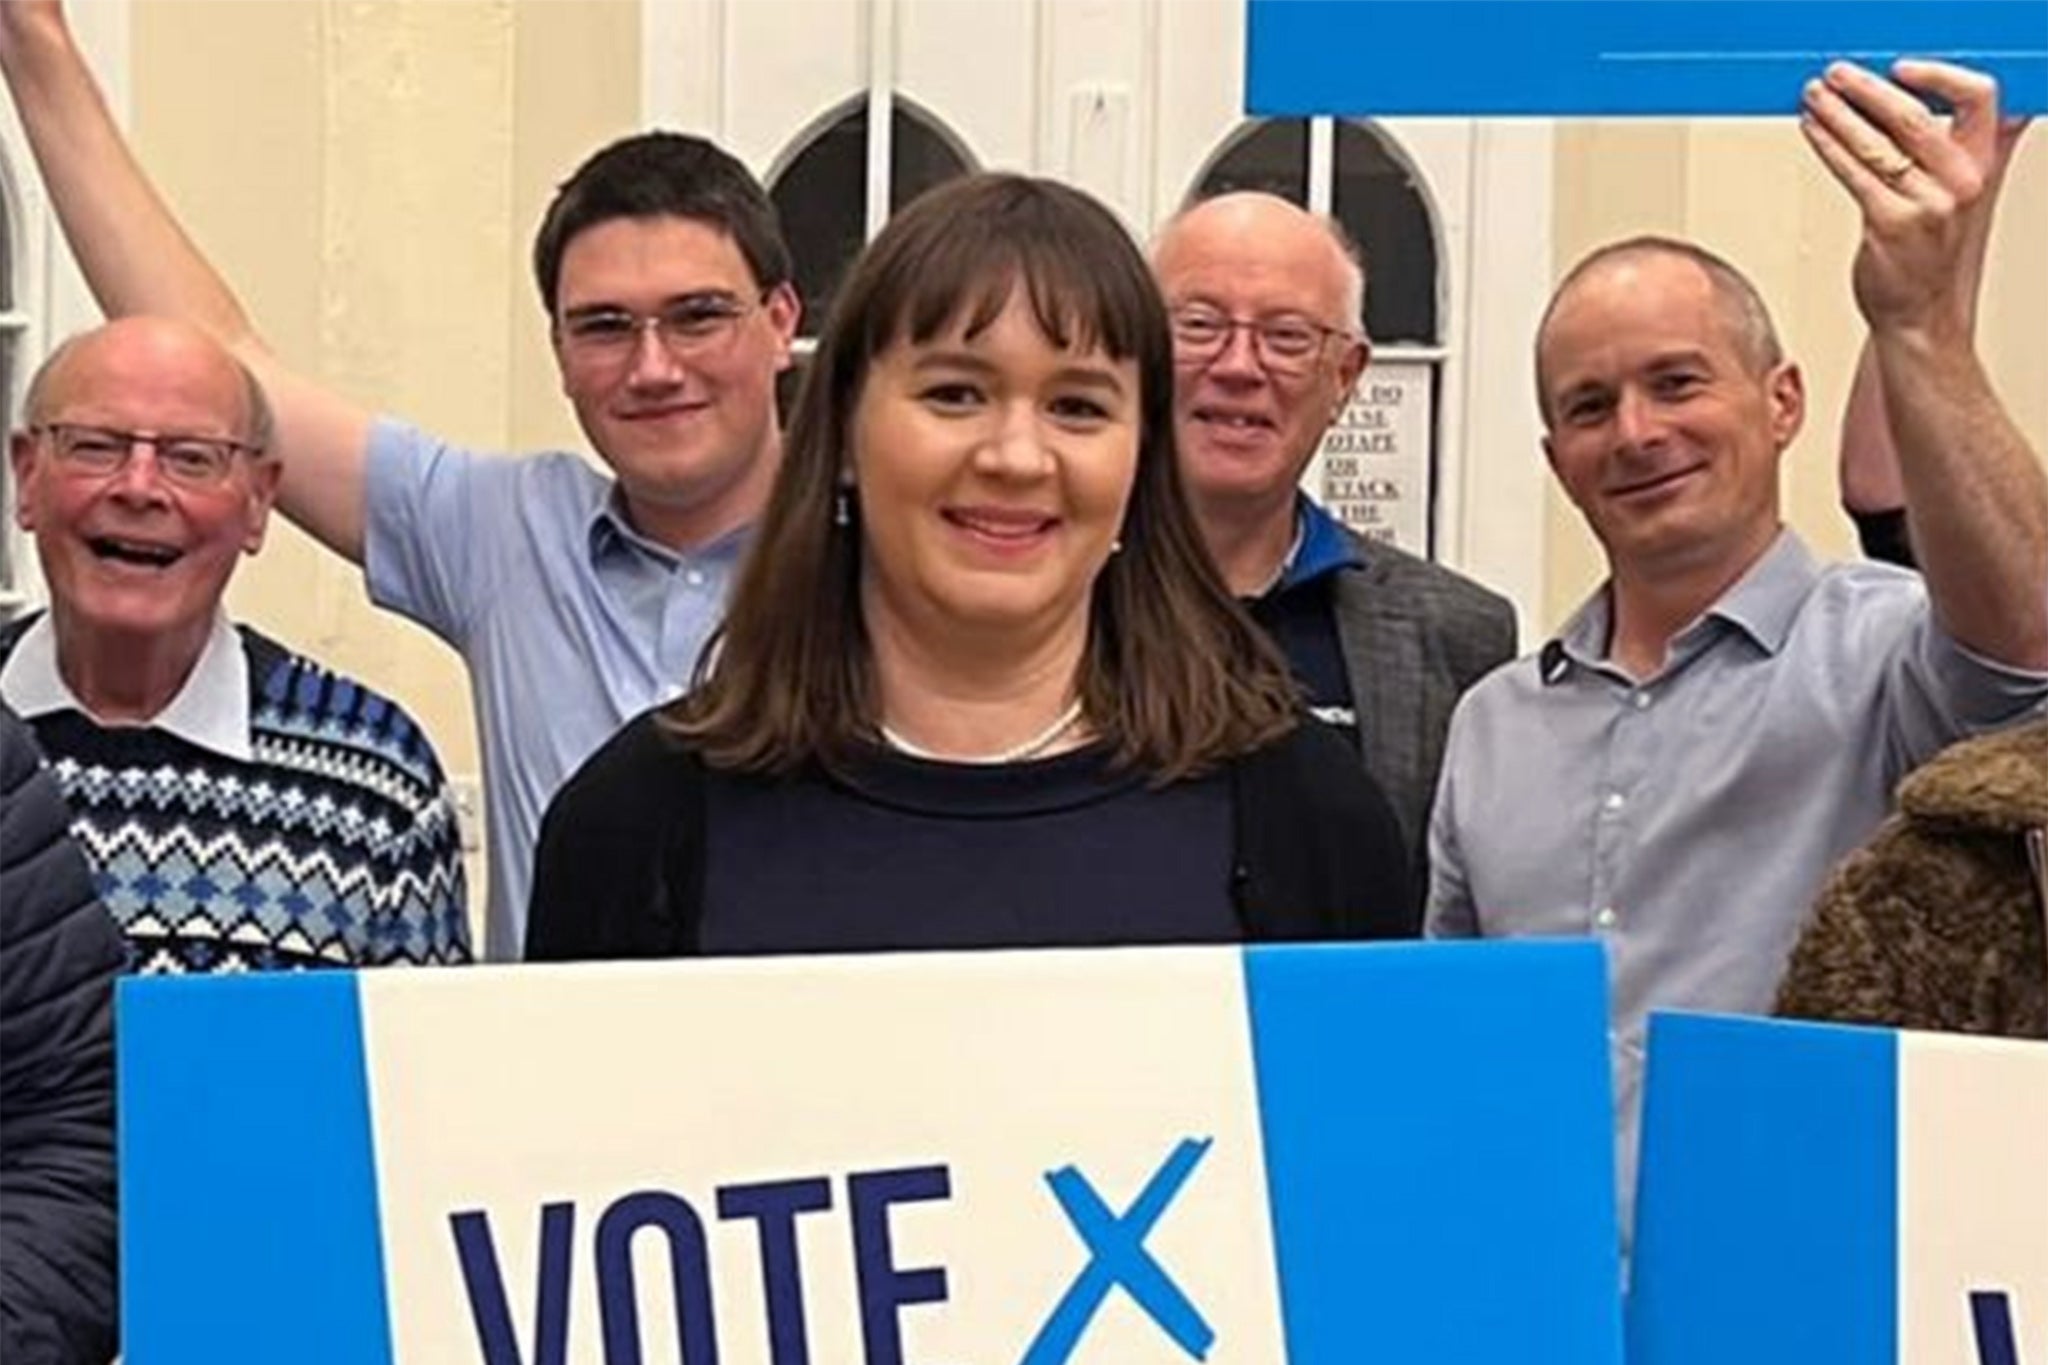 Tory candidate Laura Saunders, who previously worked at Conservative Campaign HQ, is facing a Gambling Commission investigation